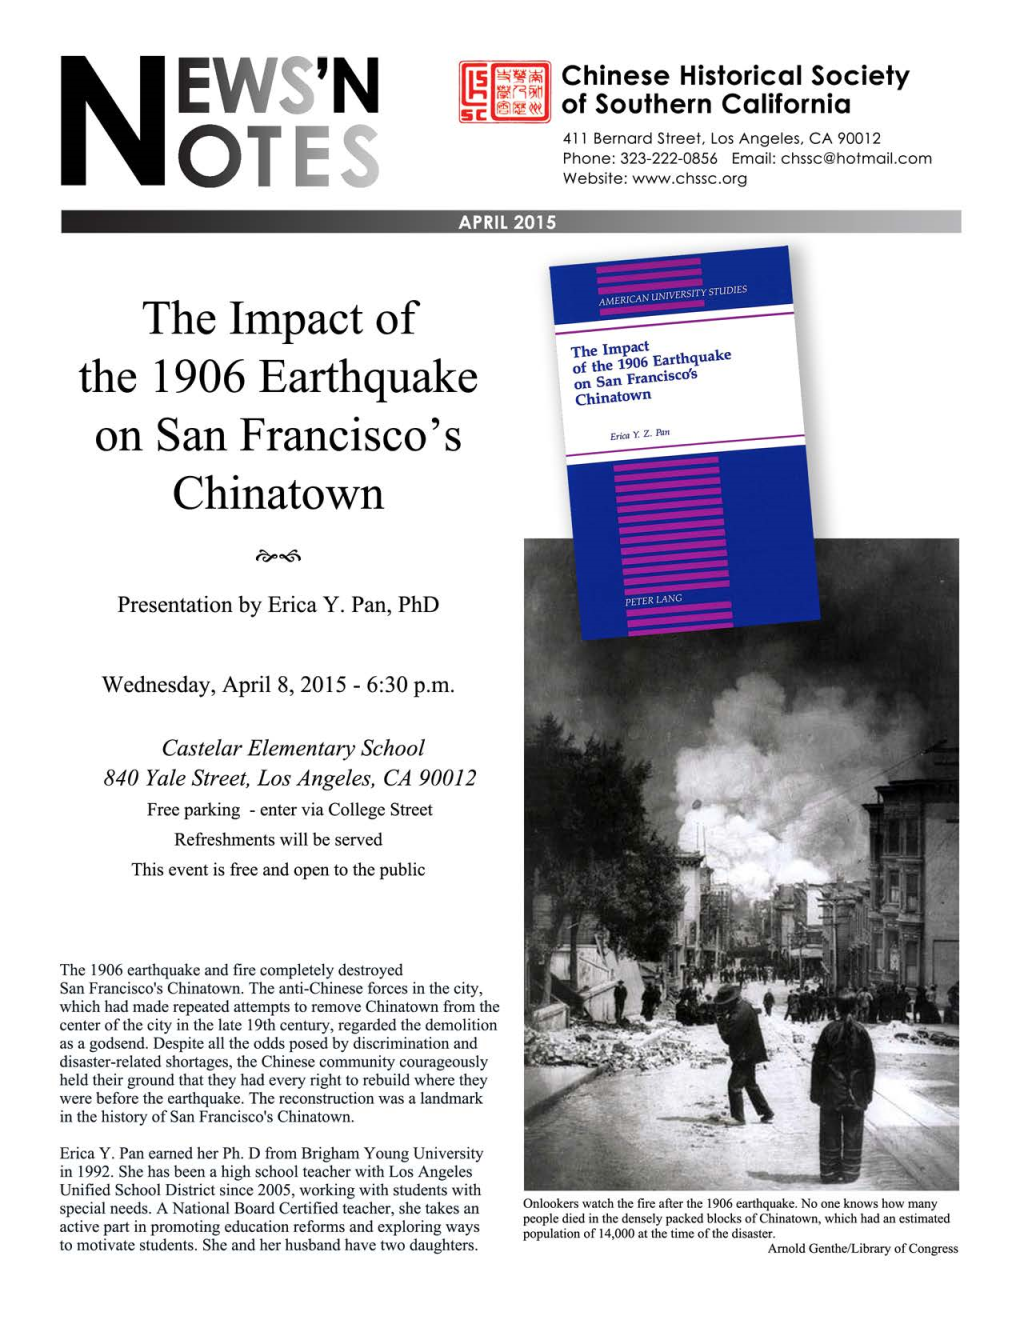 The Impact of the 1906 Earthquake on San Francisco's Chinatown